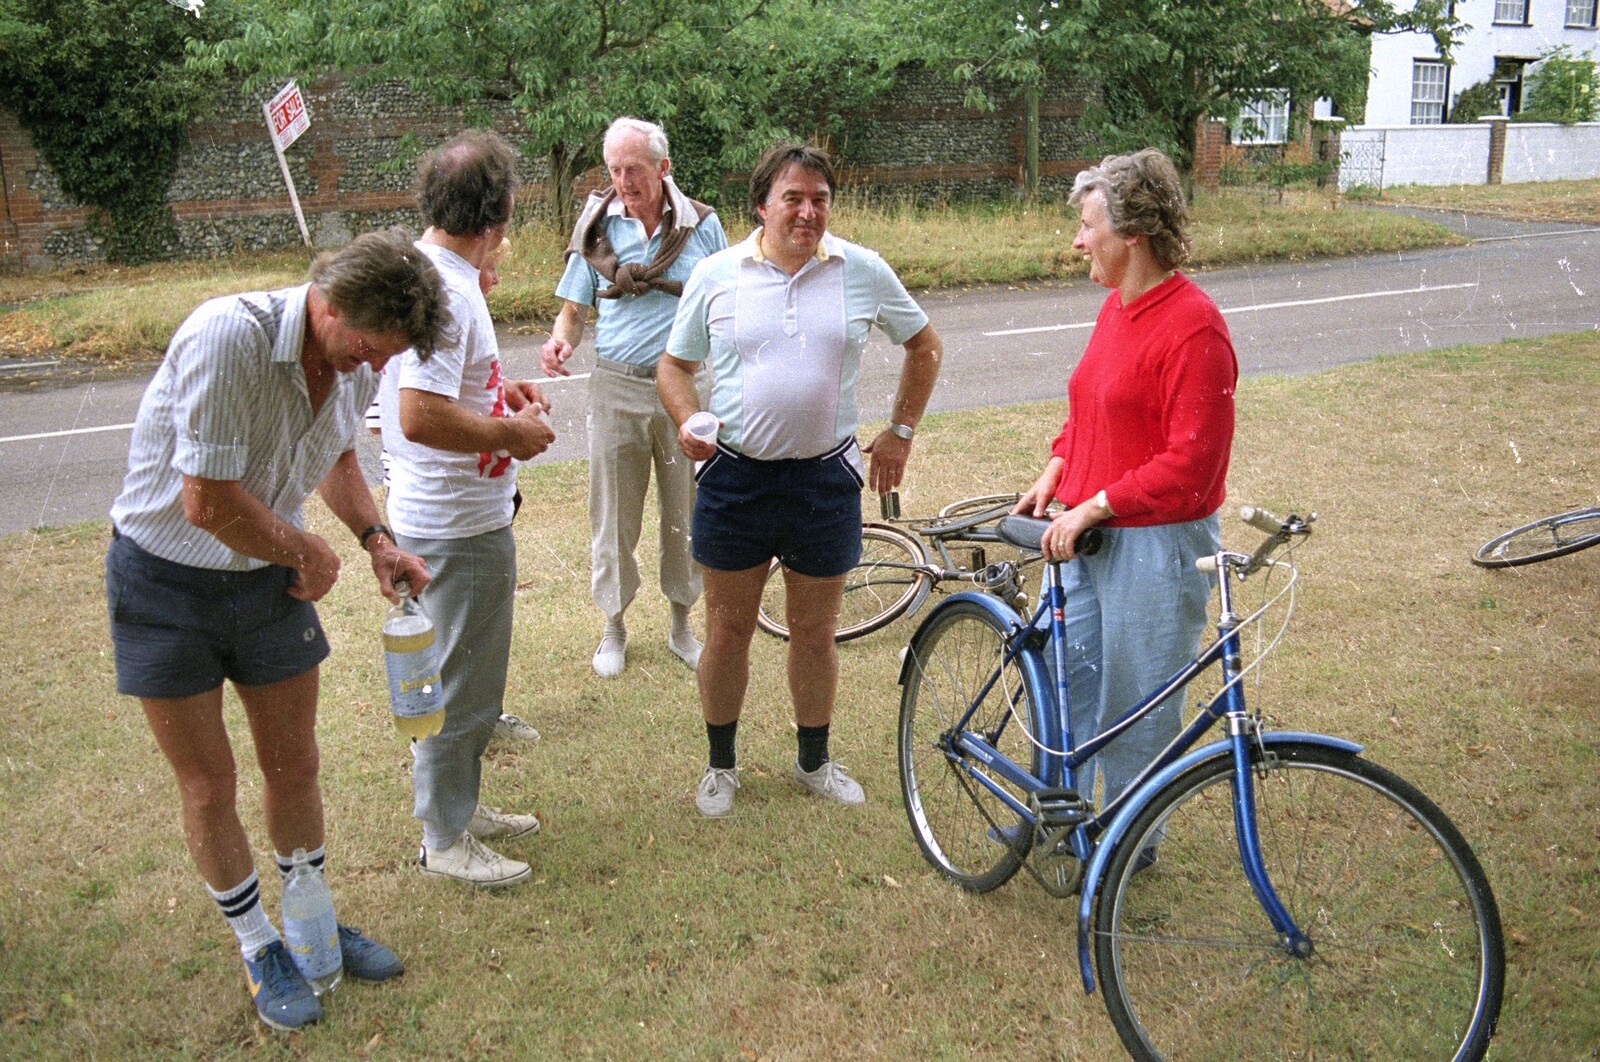 Corky and Linda from A Bike Ride to Redgrave, Suffolk - 11th August 1990